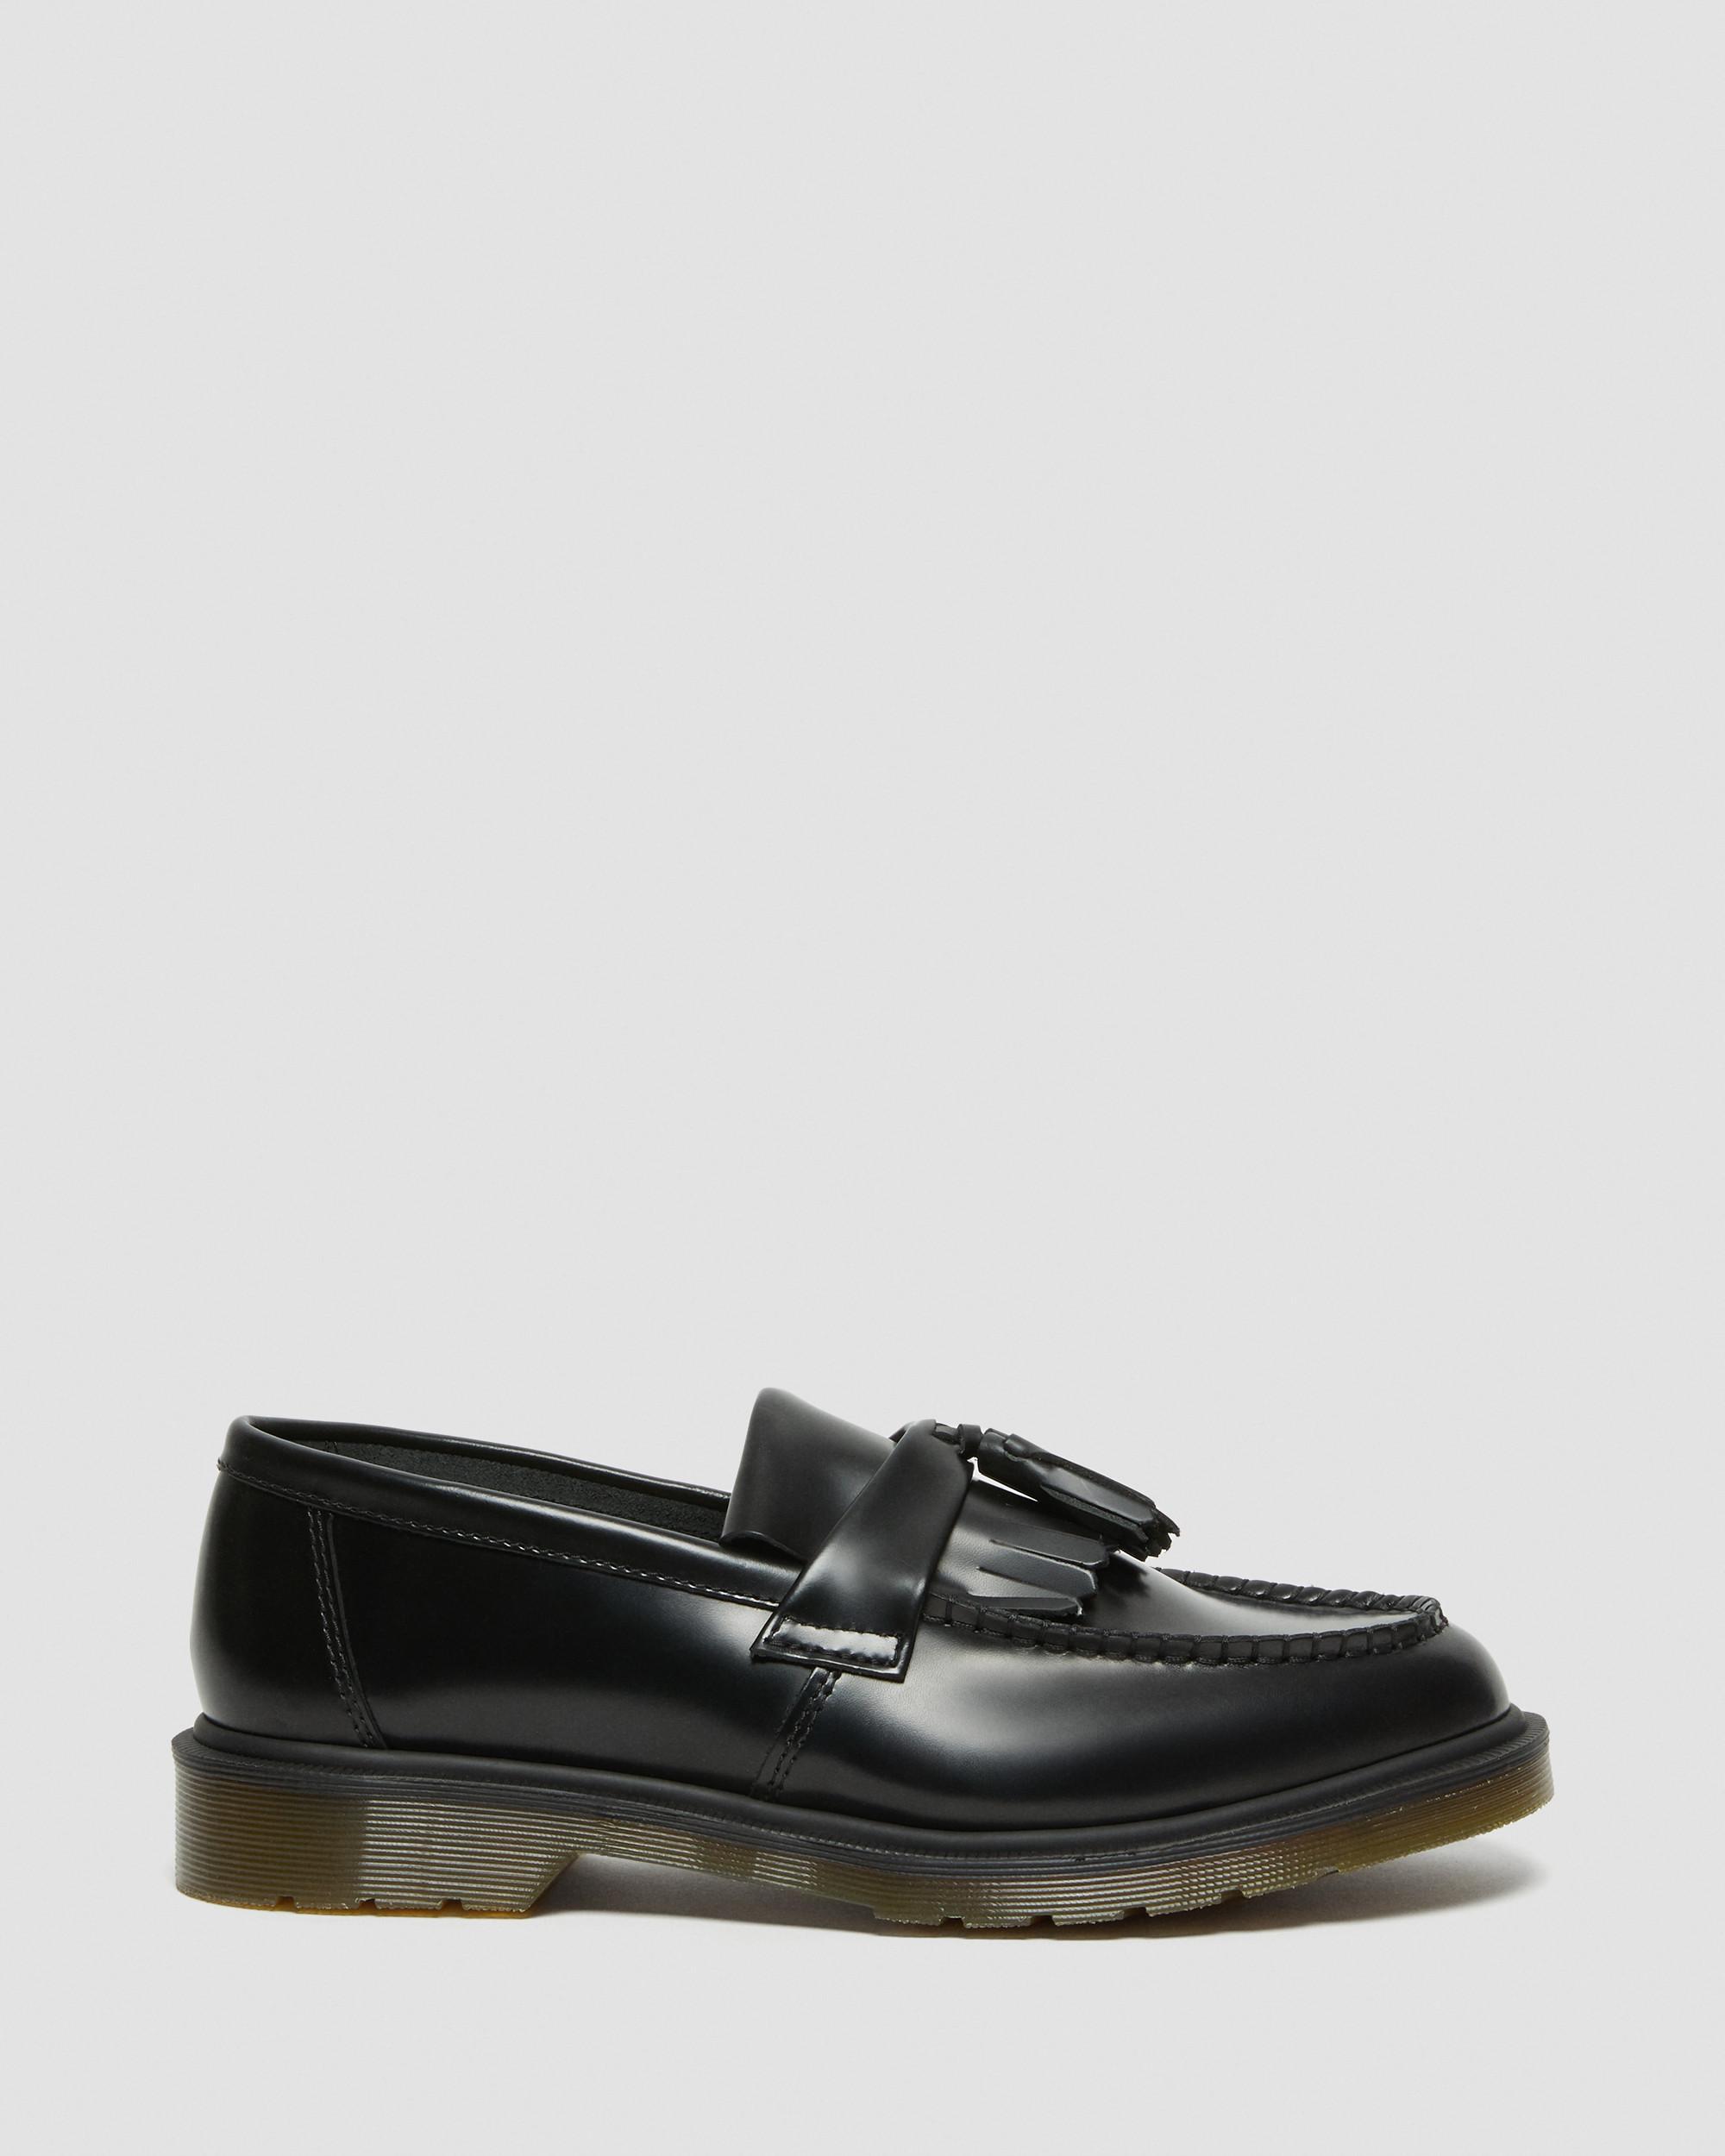 Dr. Martens Adrian Smooth Leather Tassel Loafers in Black | Lyst